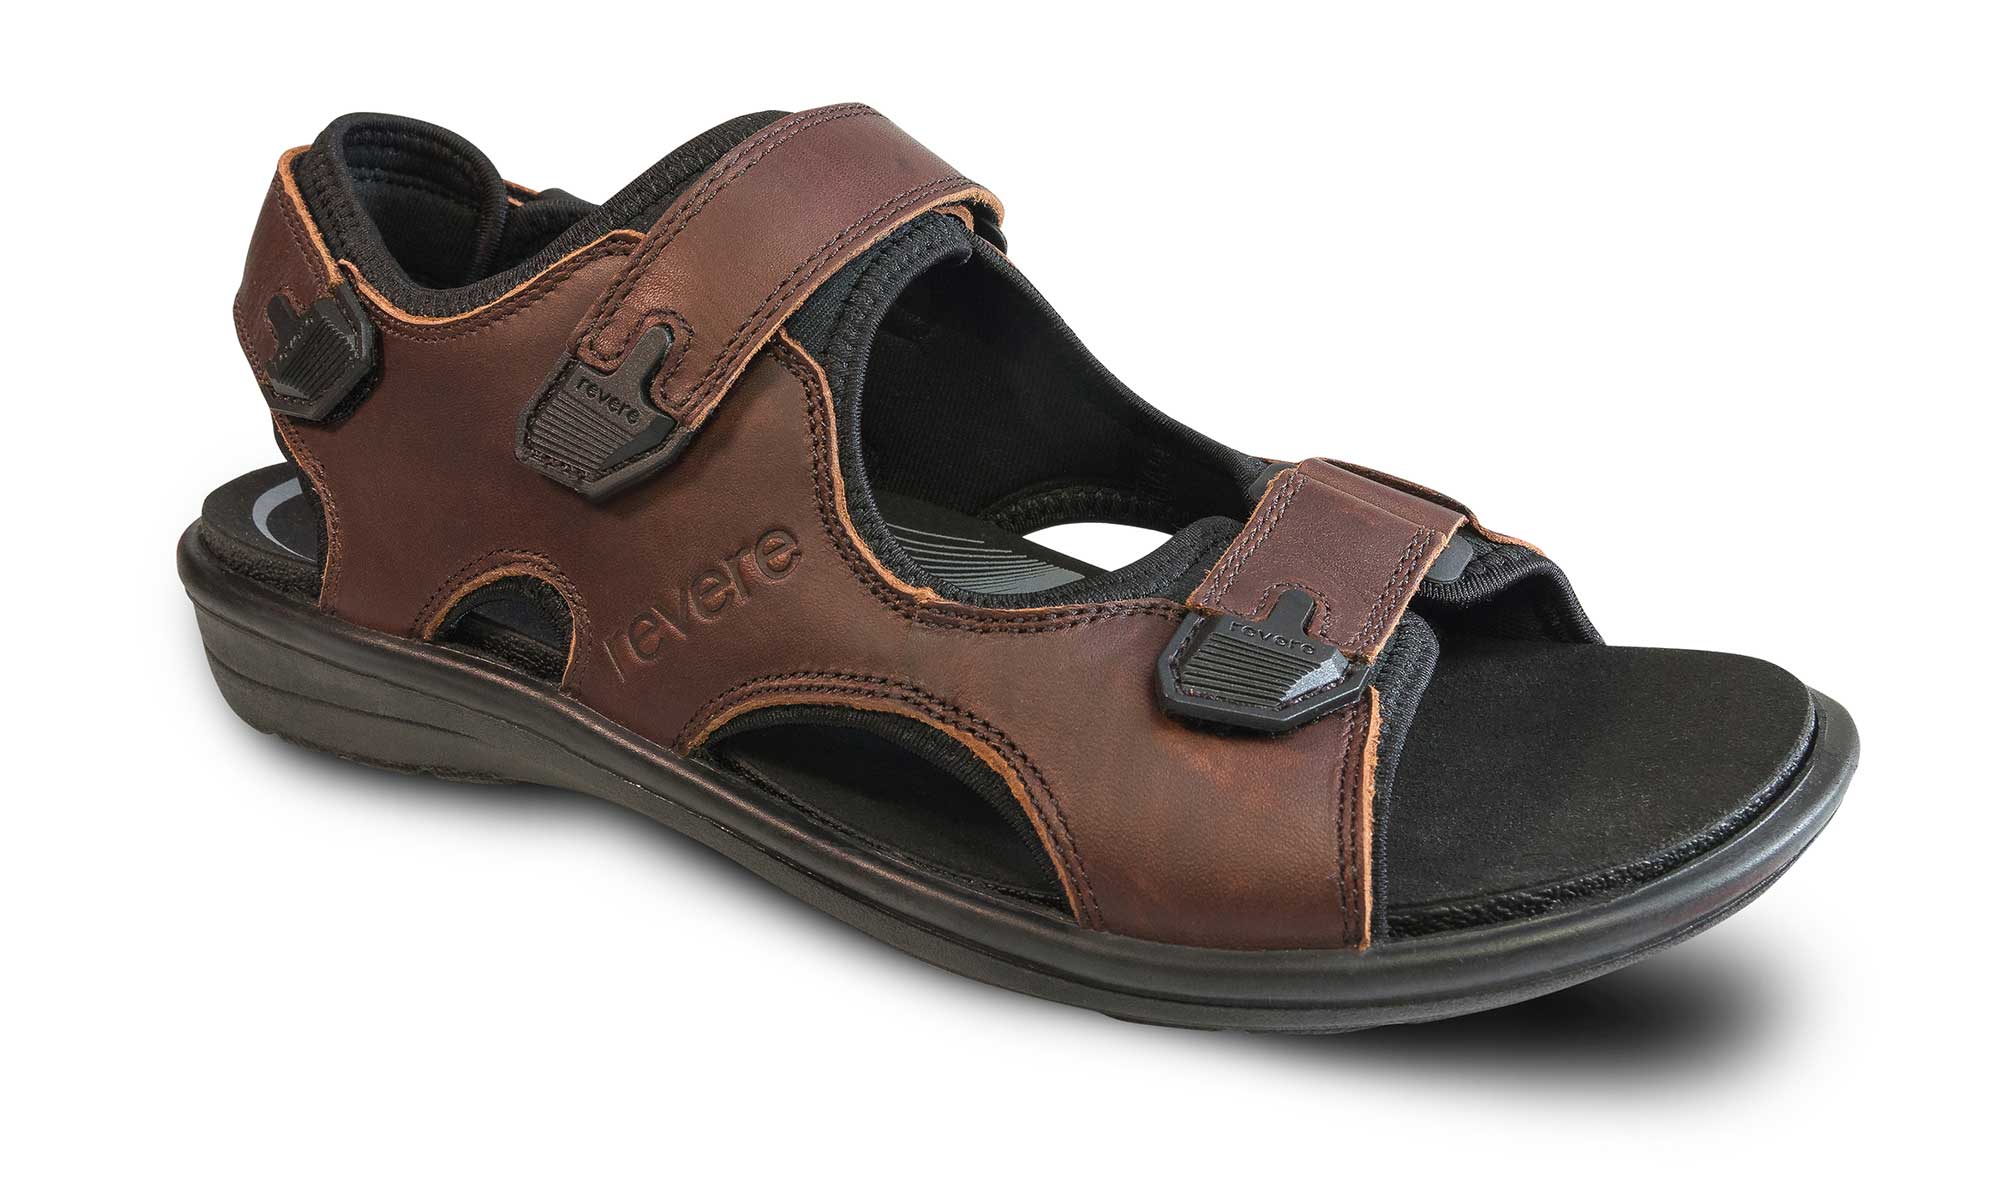 Revere Montana II - 34MON2 - Men's Sandal with Removable Foot Beds for ...